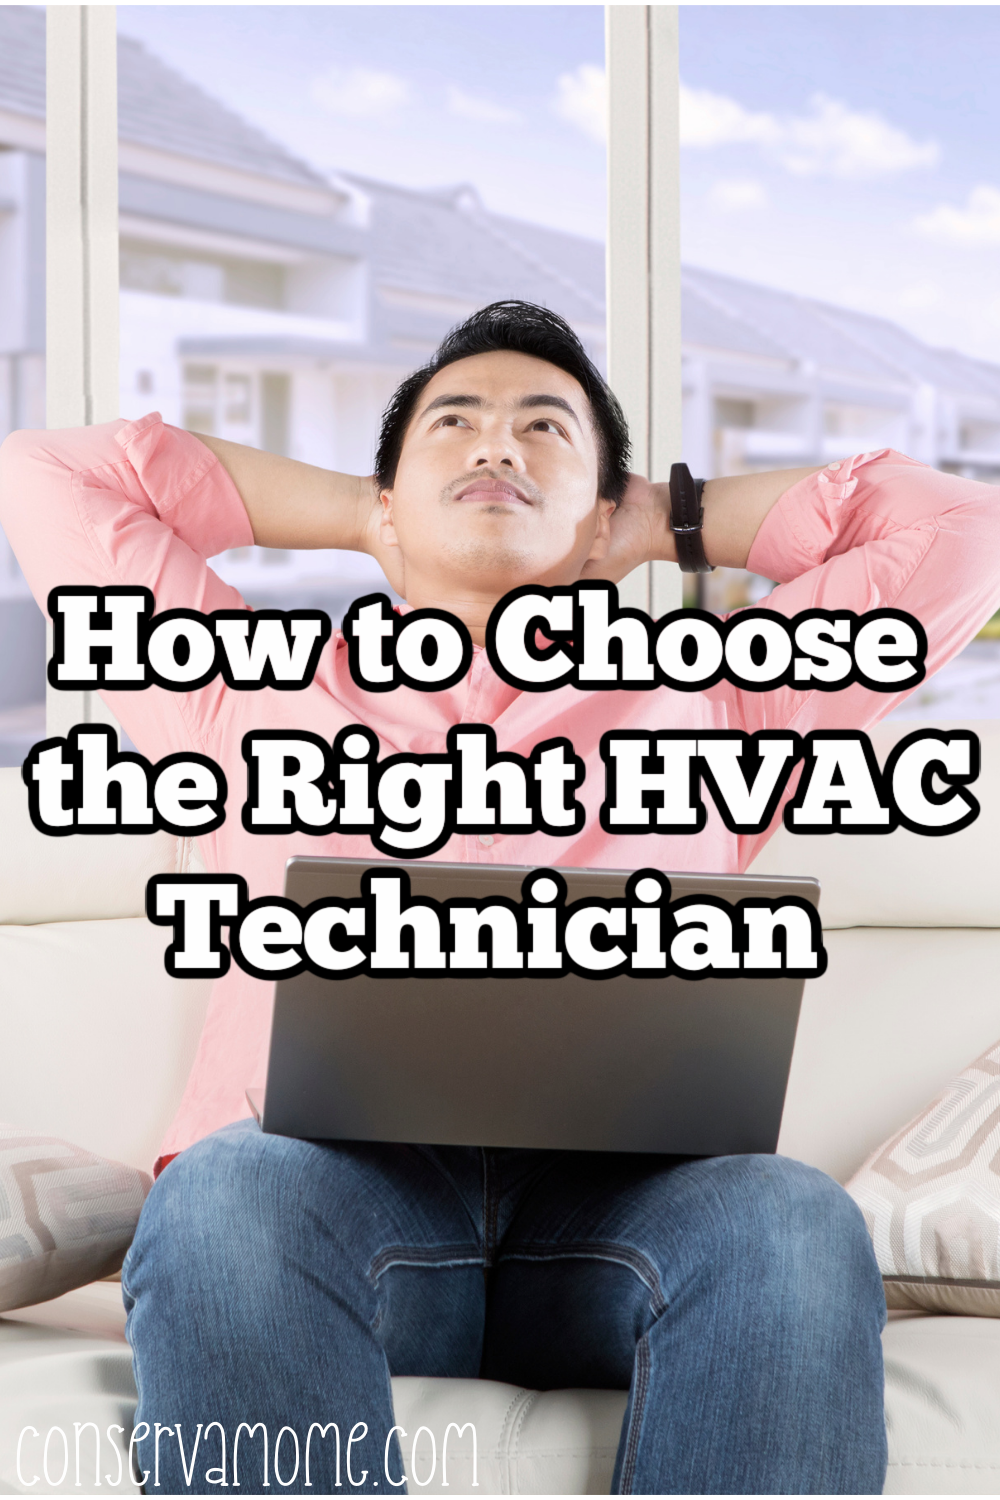 how to choose the right HBAC technician